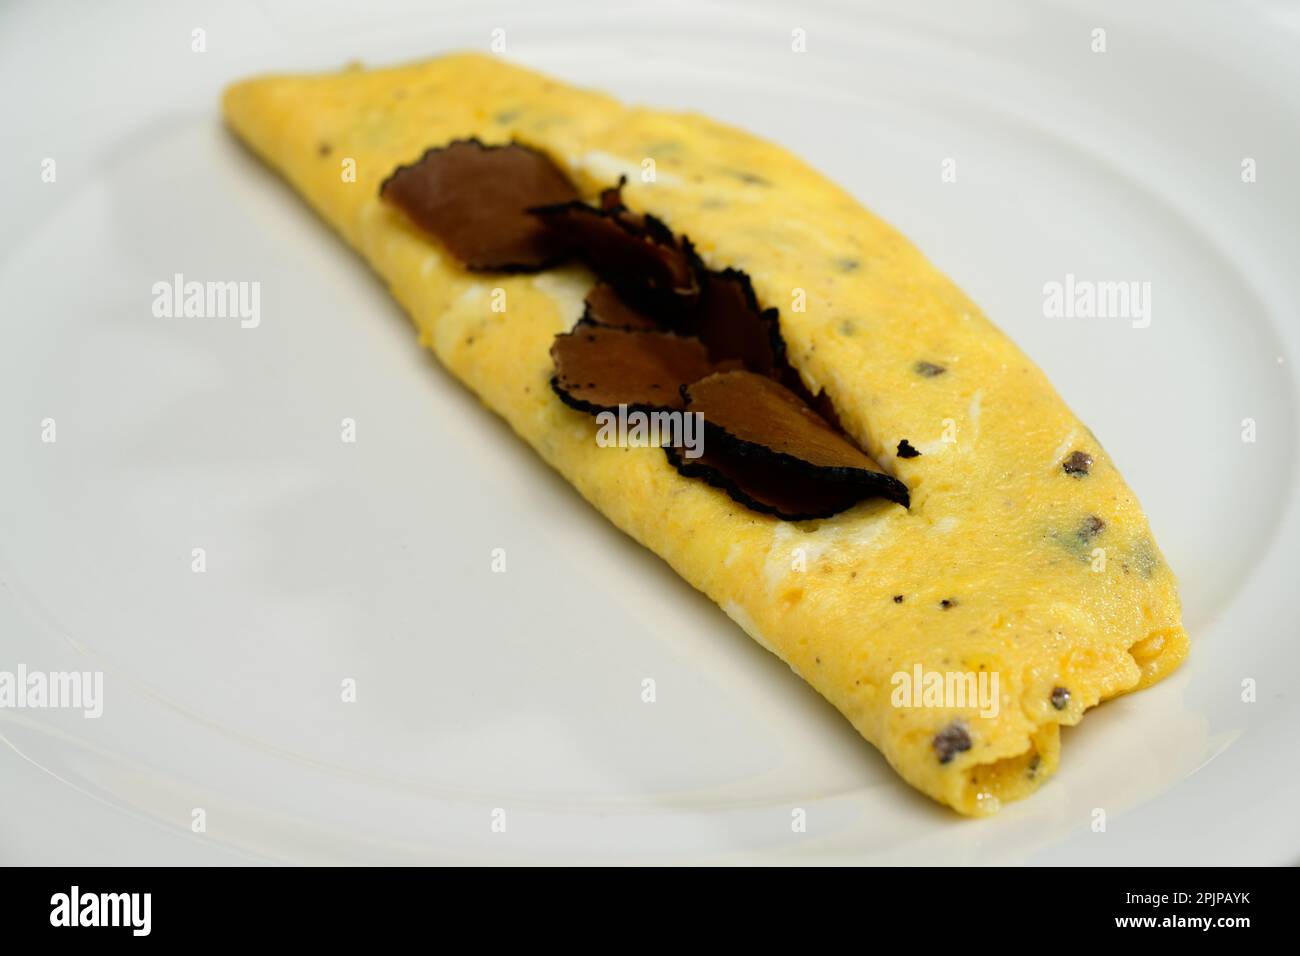 French Truffle Omelette Eggs or Omelette auc Truffes with Black Summer Truffles on a White Plate Stock Photo